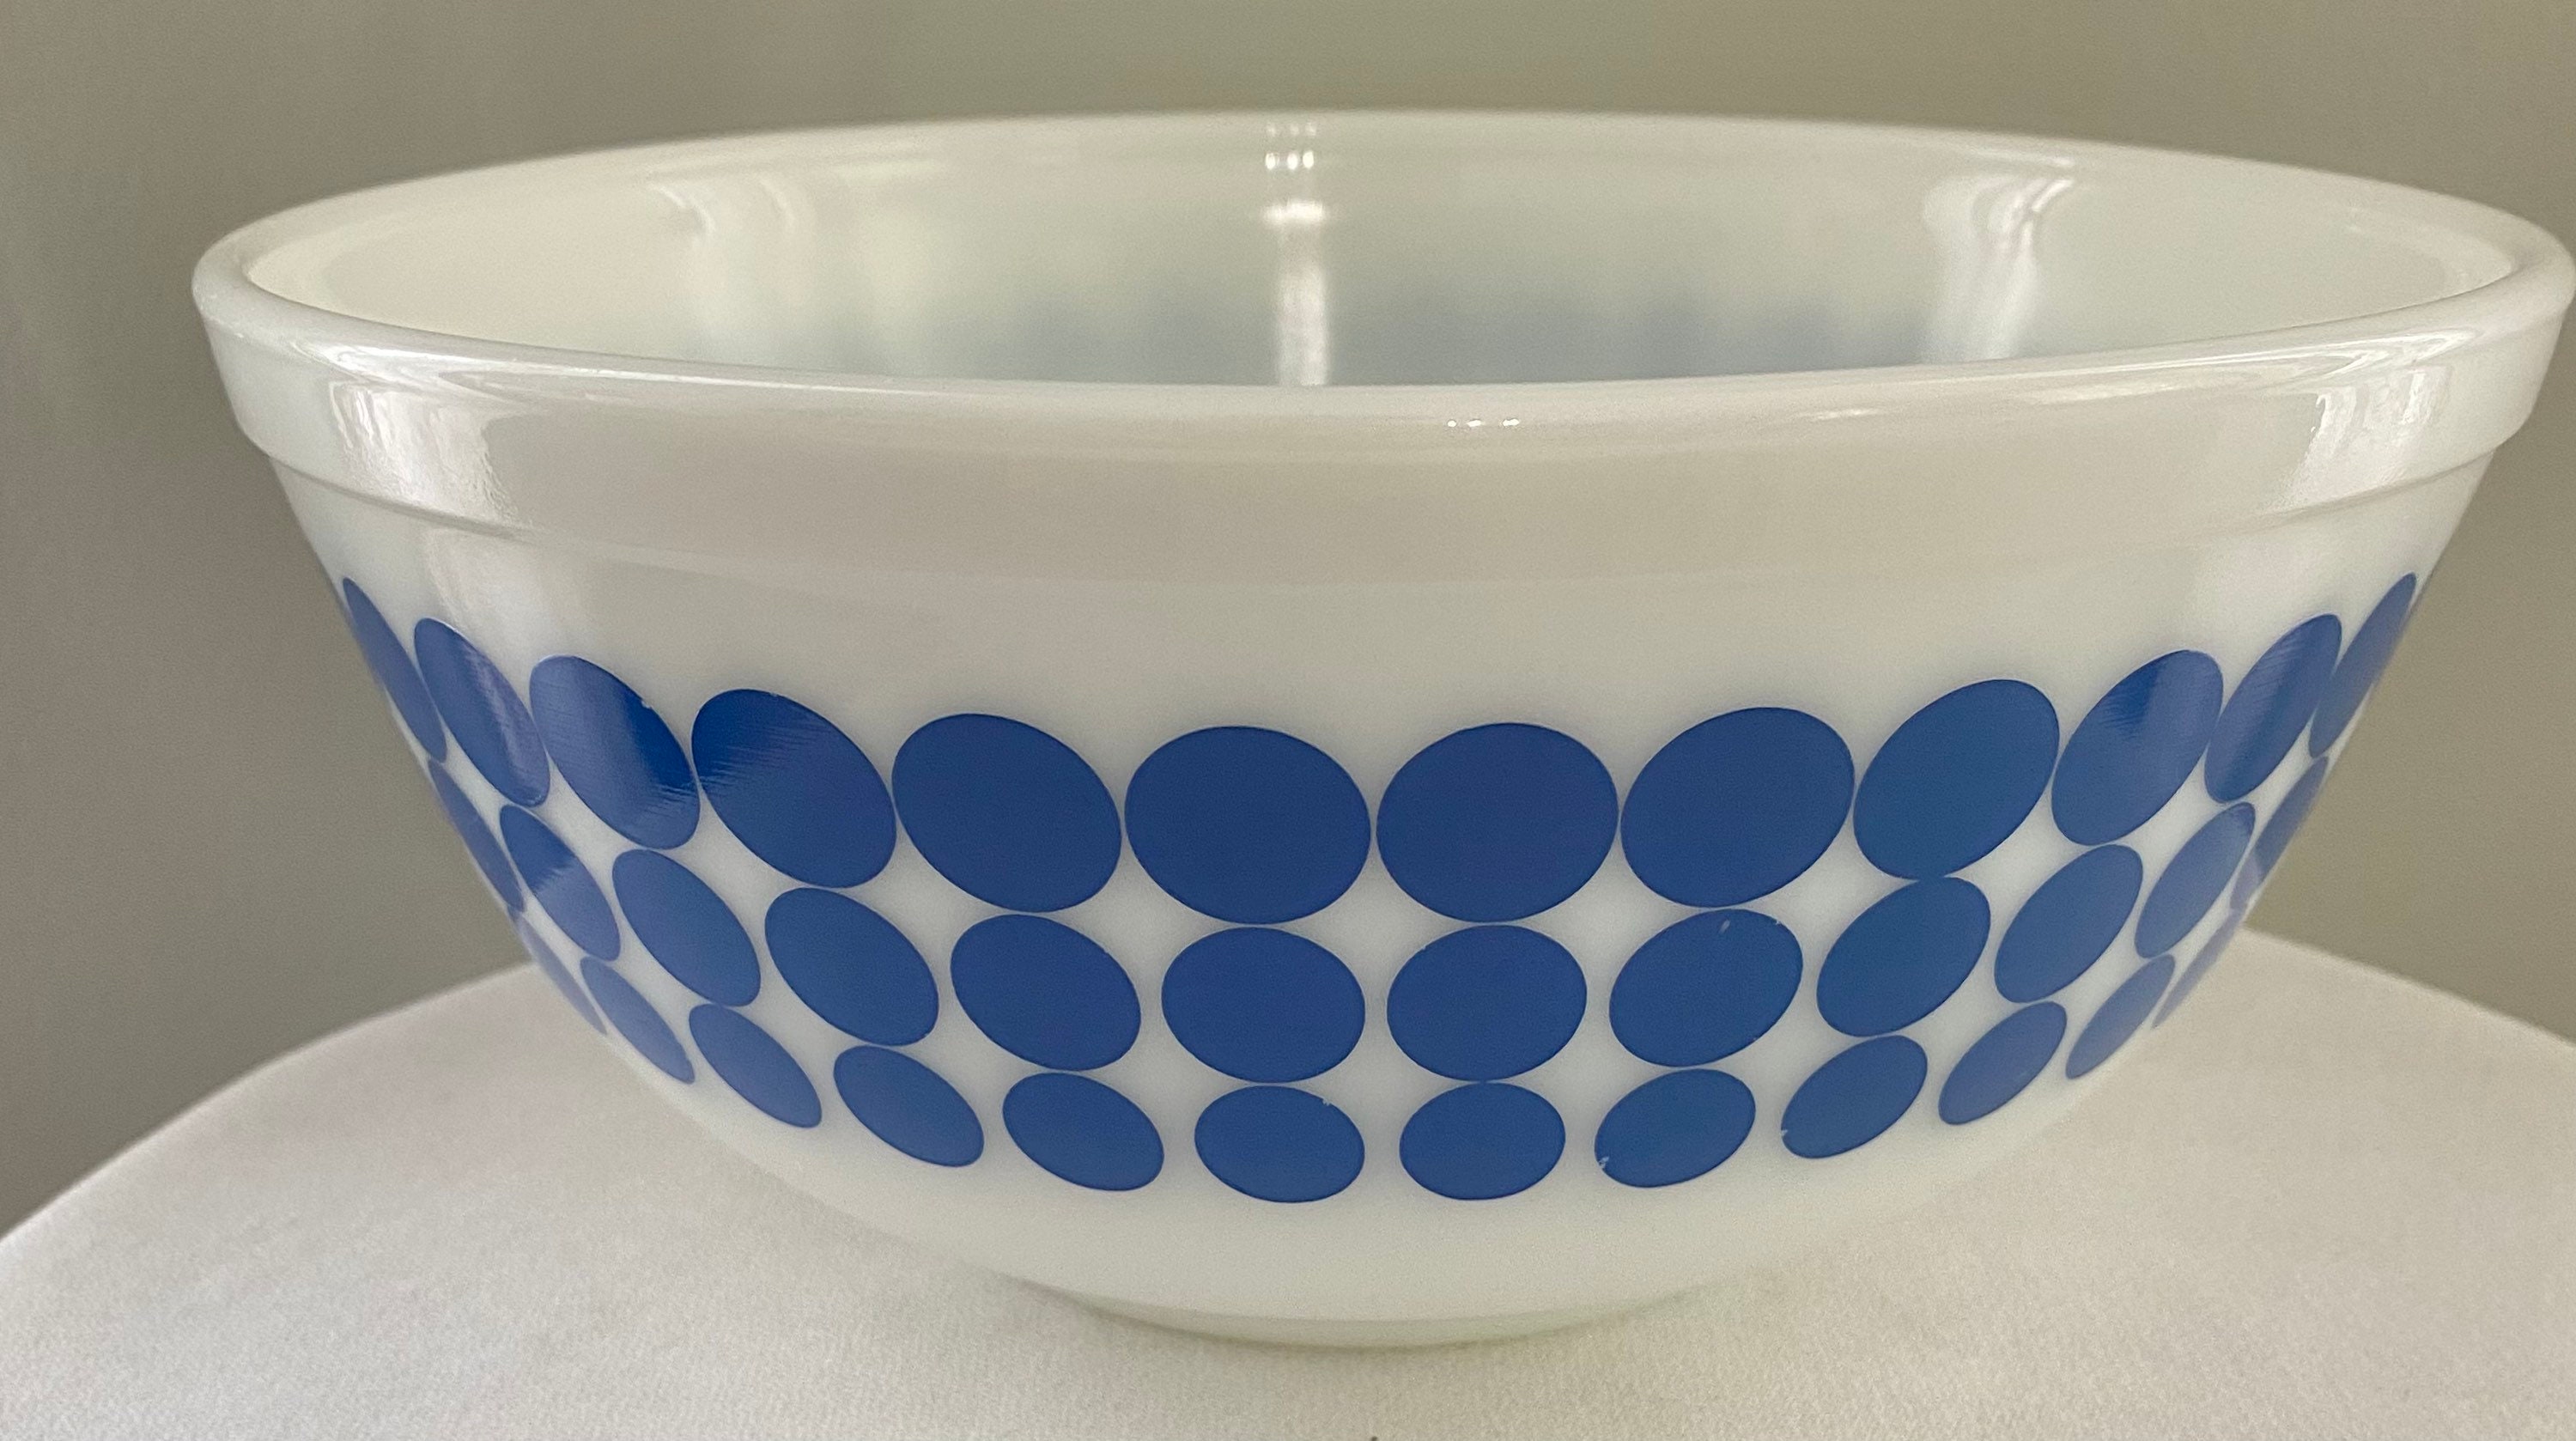 Sold at Auction: 2 Vintage Blue Pyrex Glass Mixing Bowls